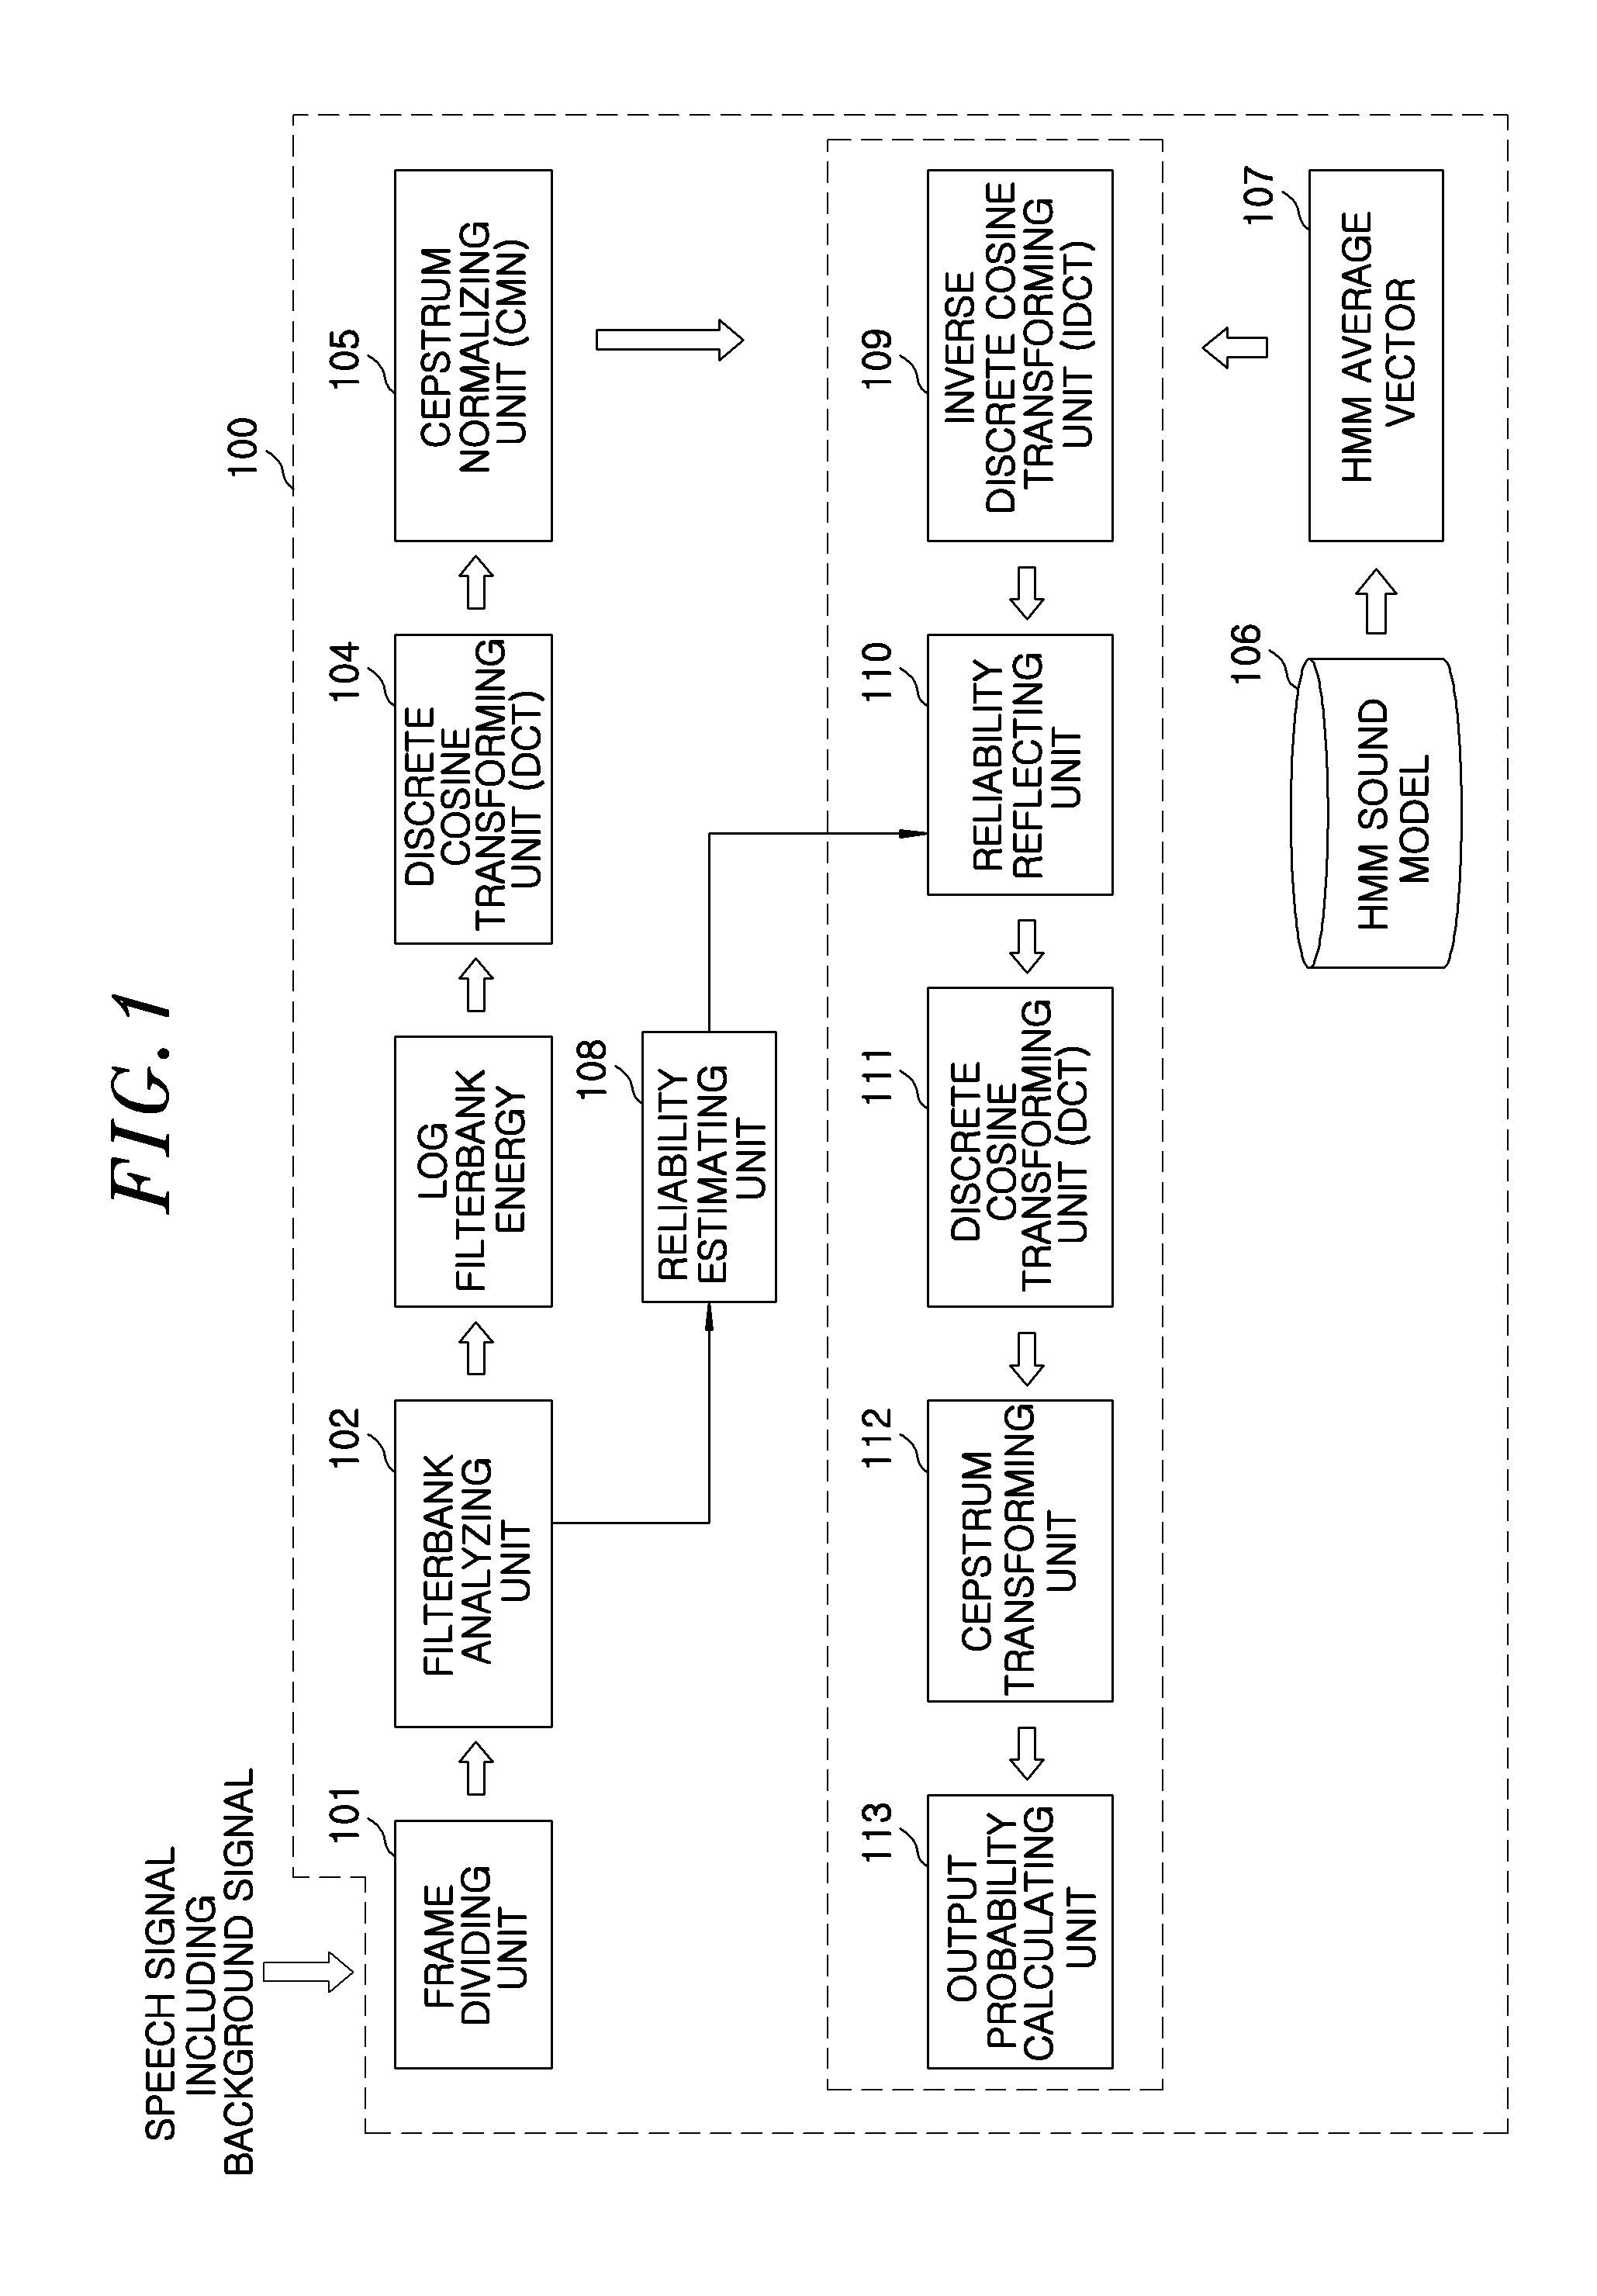 Speech recognition apparatus based on cepstrum feature vector and method thereof